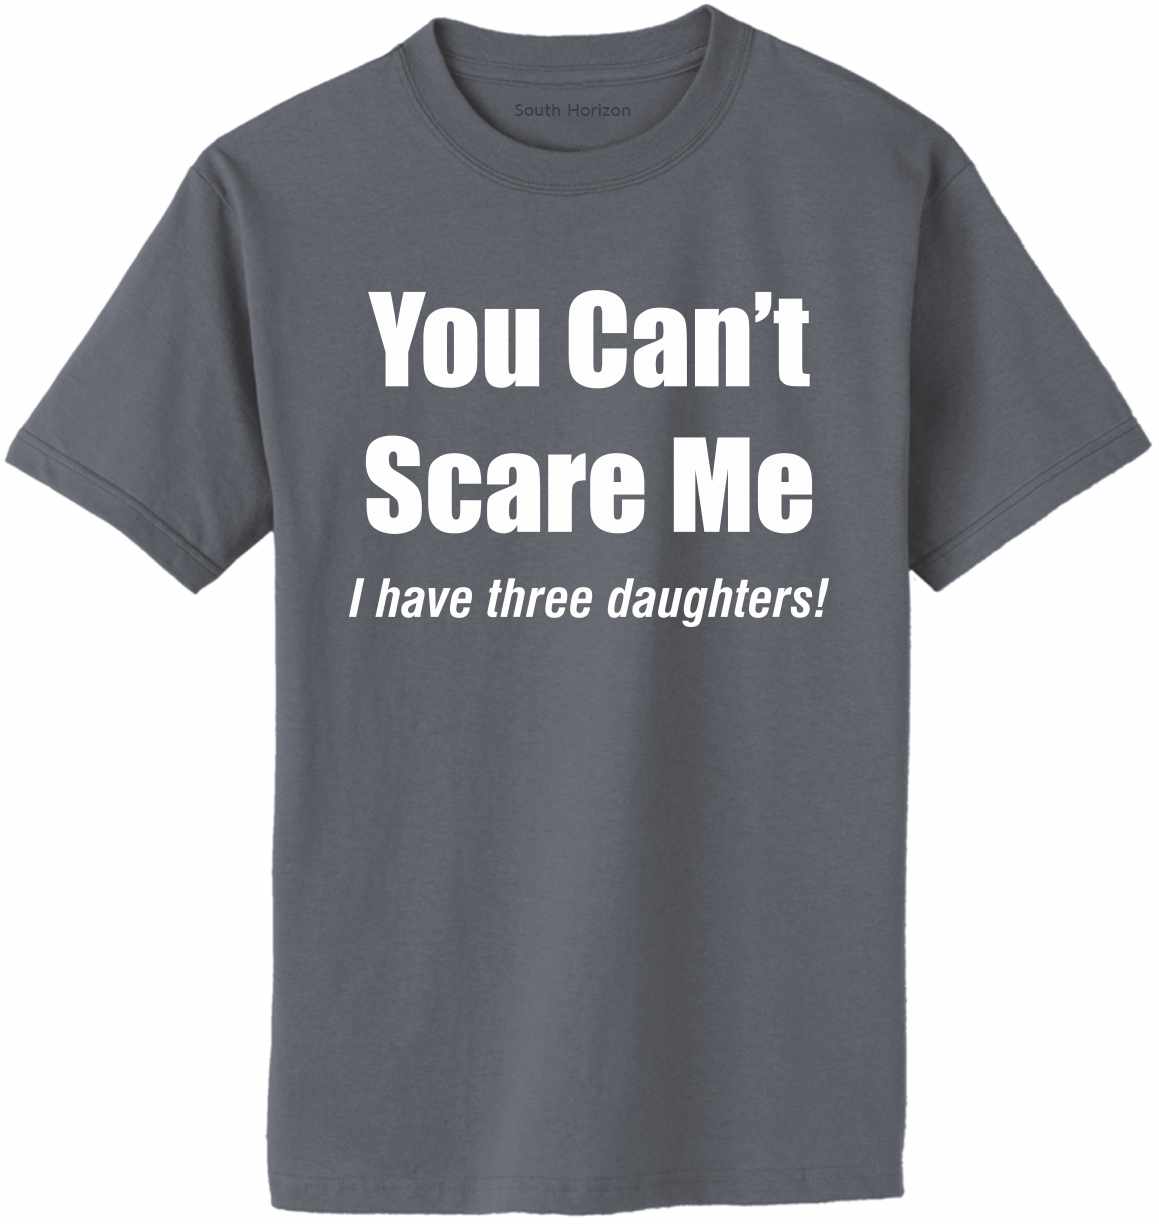 You Can't Scare Me, I have three daughters Adult T-Shirt